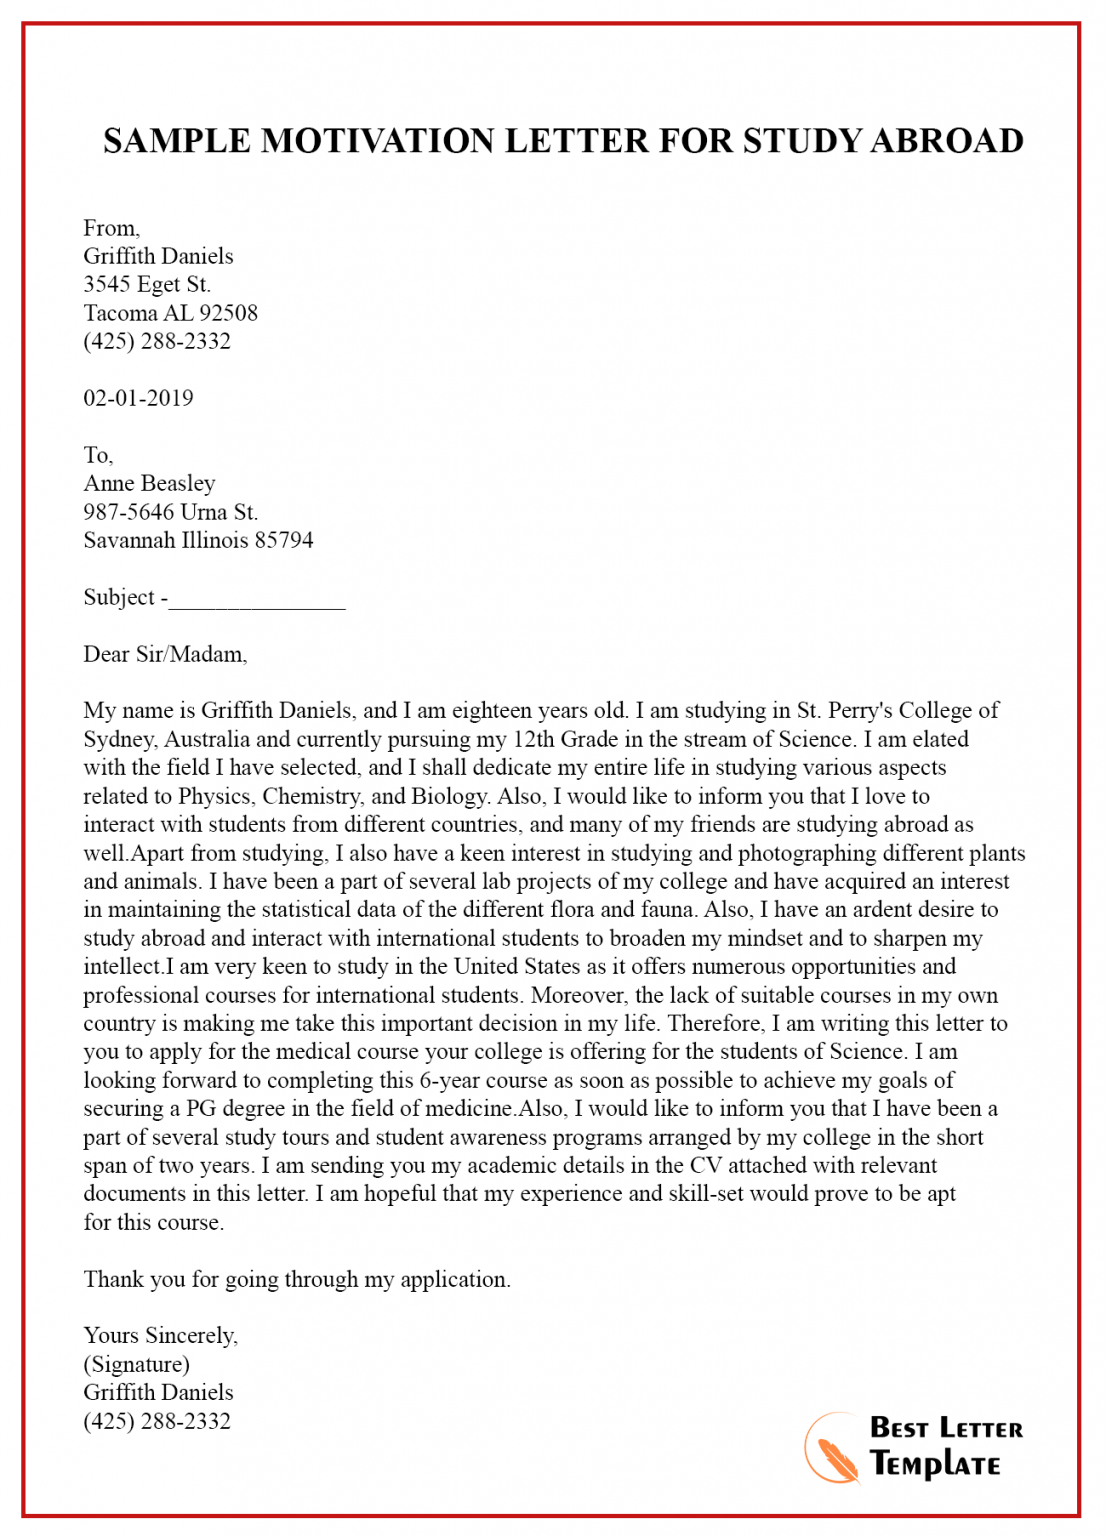 motivation letter for a research job